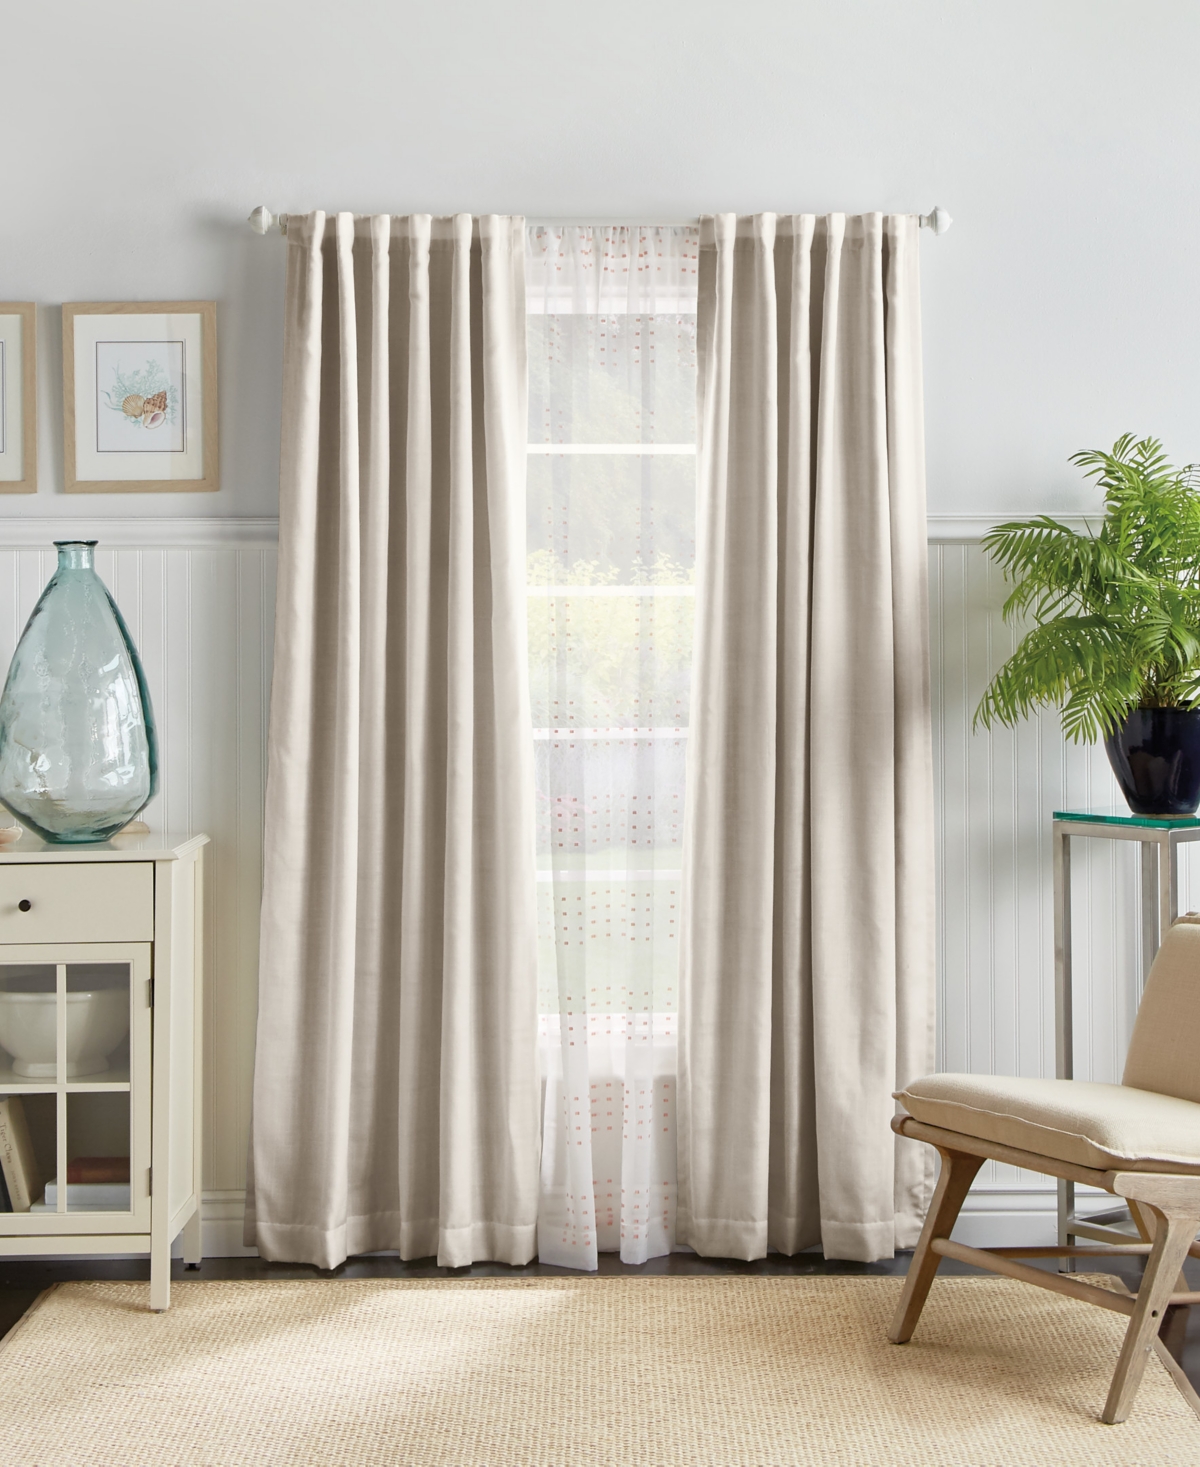 Bedford Plaid Backtab Blackout Curtain Panel Set, 95", Created For Macy's - White